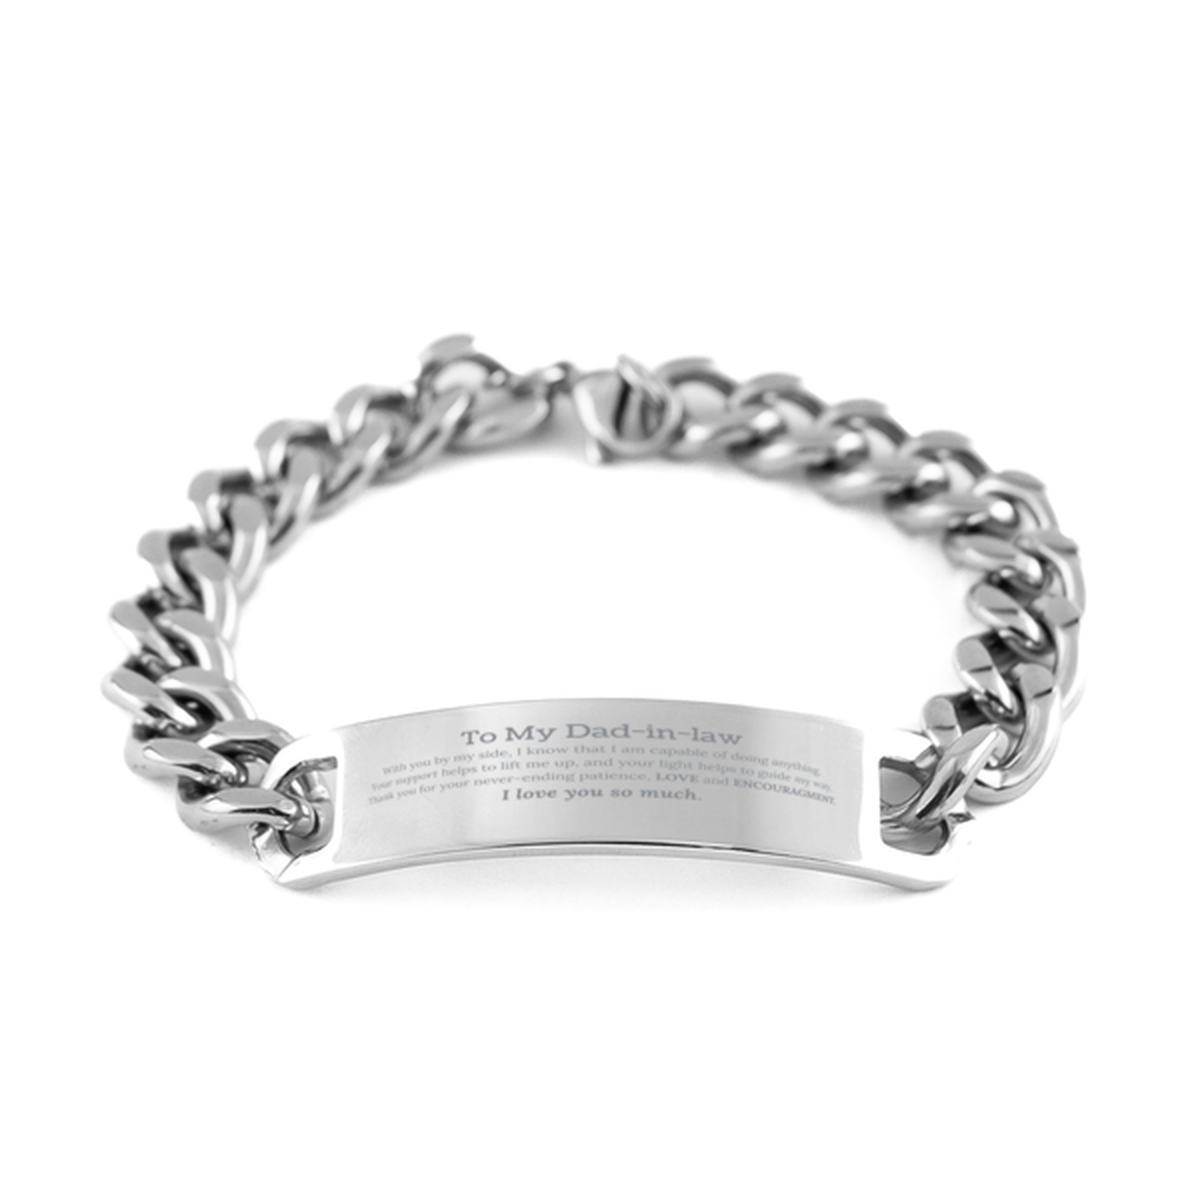 Appreciation Dad-in-law Cuban Chain Stainless Steel Bracelet Gifts, To My Dad-in-law Birthday Christmas Wedding Keepsake Gifts for Dad-in-law With you by my side, I know that I am capable of doing anything. I love you so much